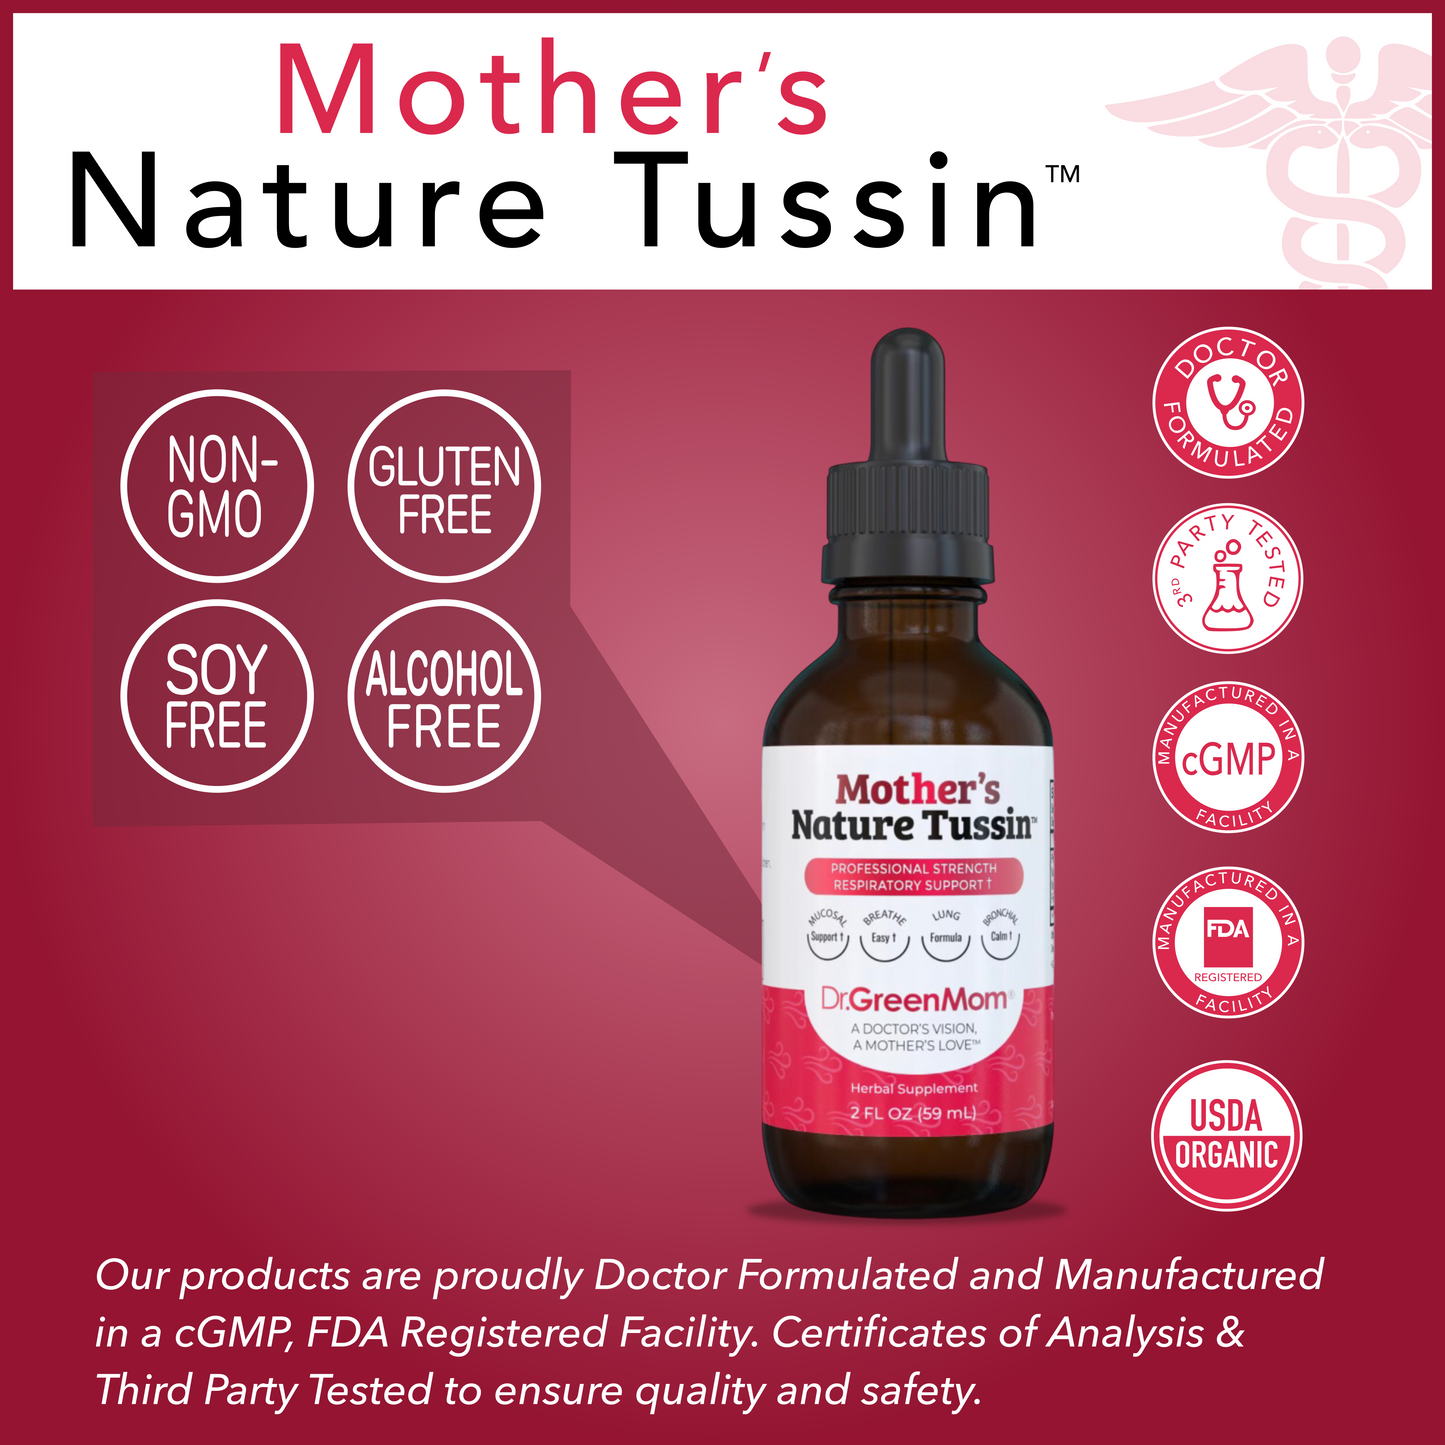 Mother's Nature Tussin™